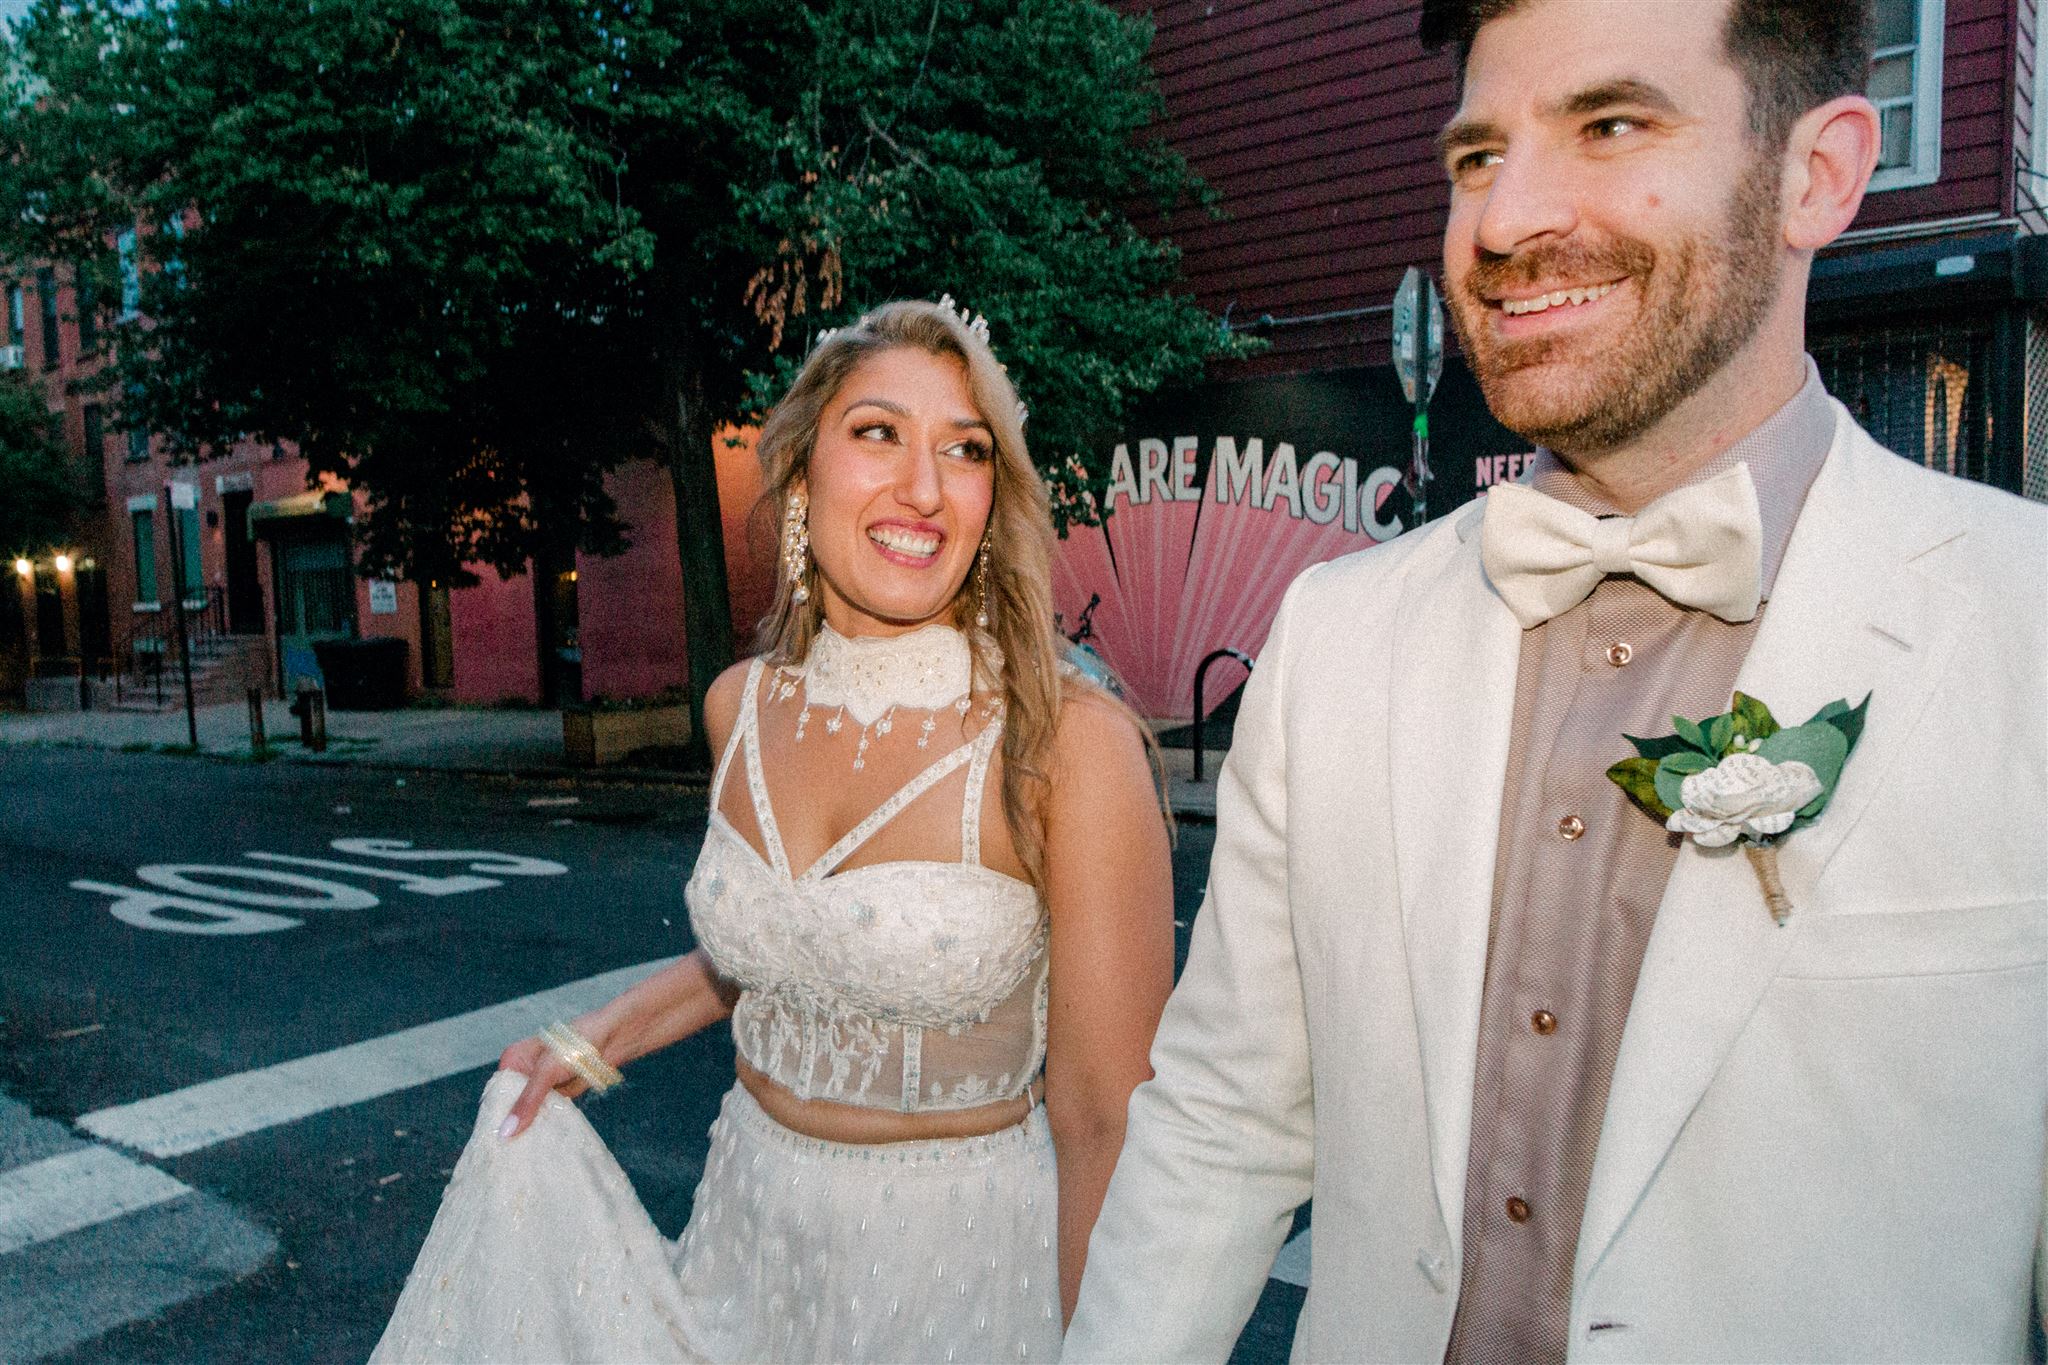 Bride and groom crossing the street smiling in New York City